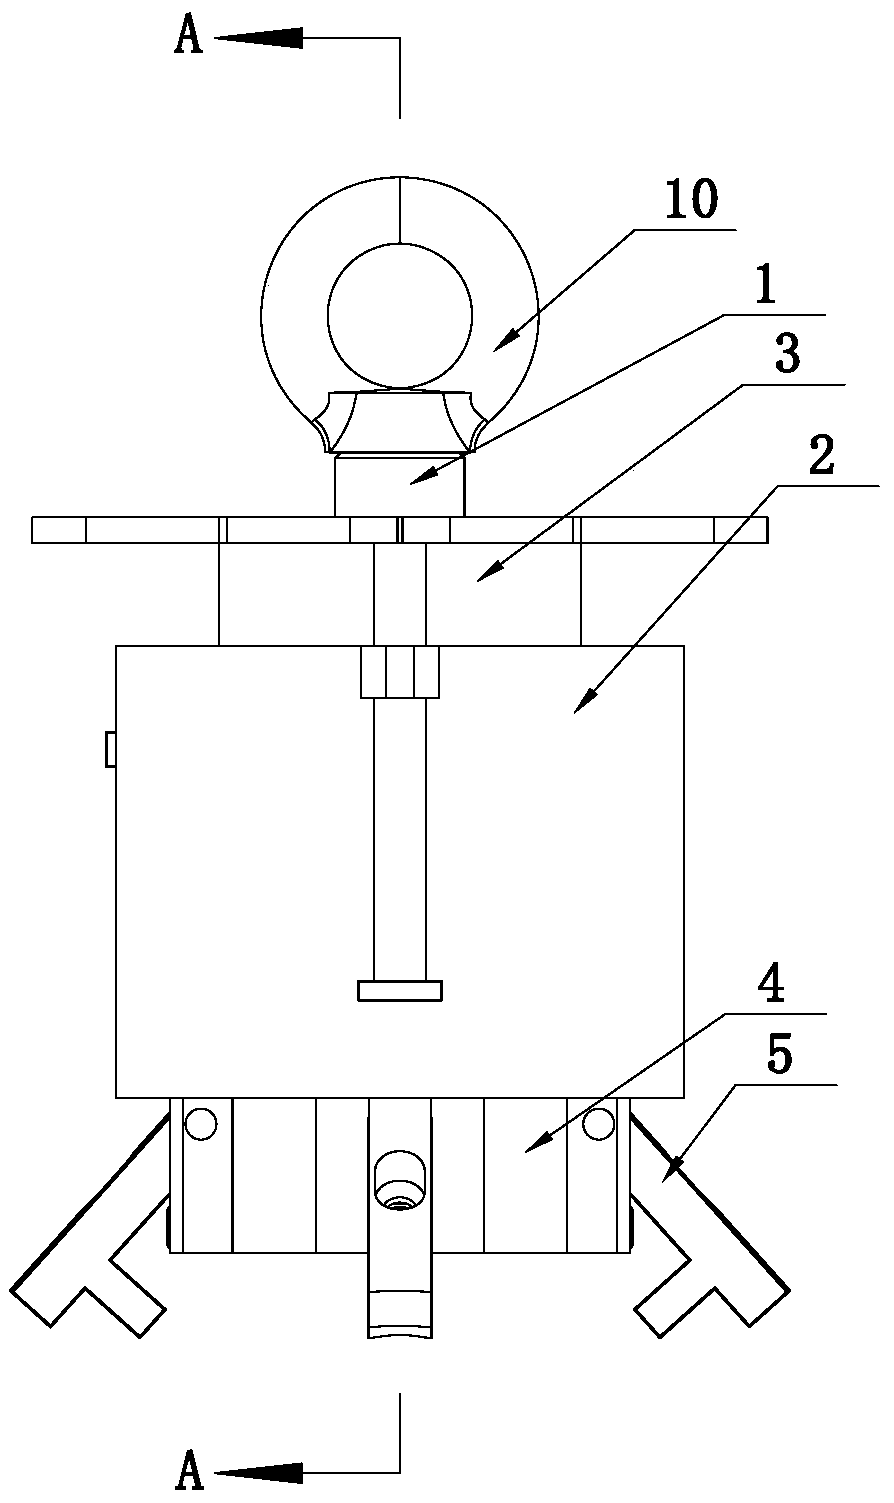 Lifting appliance for hoisting reactor core guide column